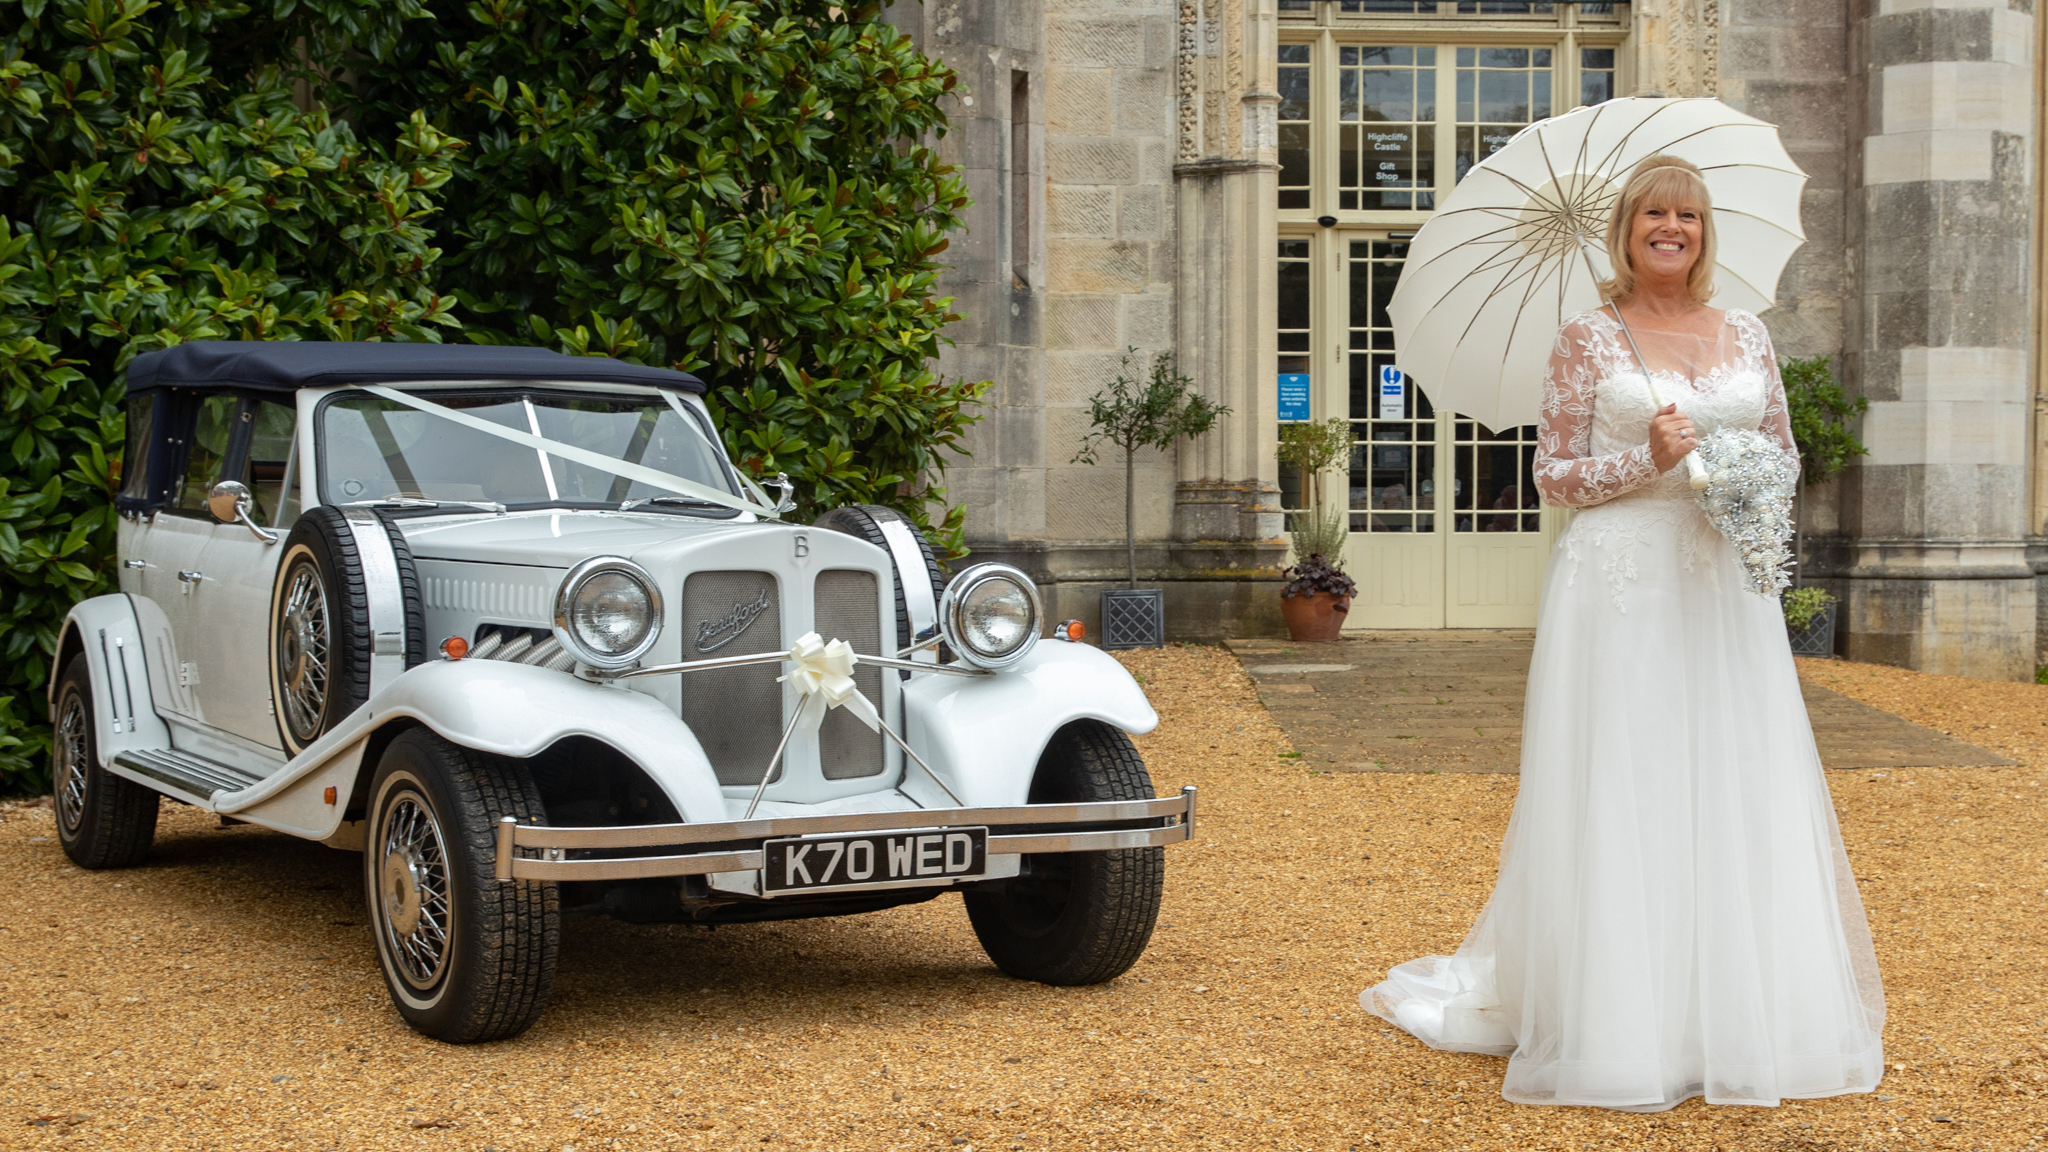 White vintage Beauford convertible with roof up decorated with white ribbon and bow at a local Royal Tunbridge Wells wedding. Smiling bride standing next to the vehicle with a whit